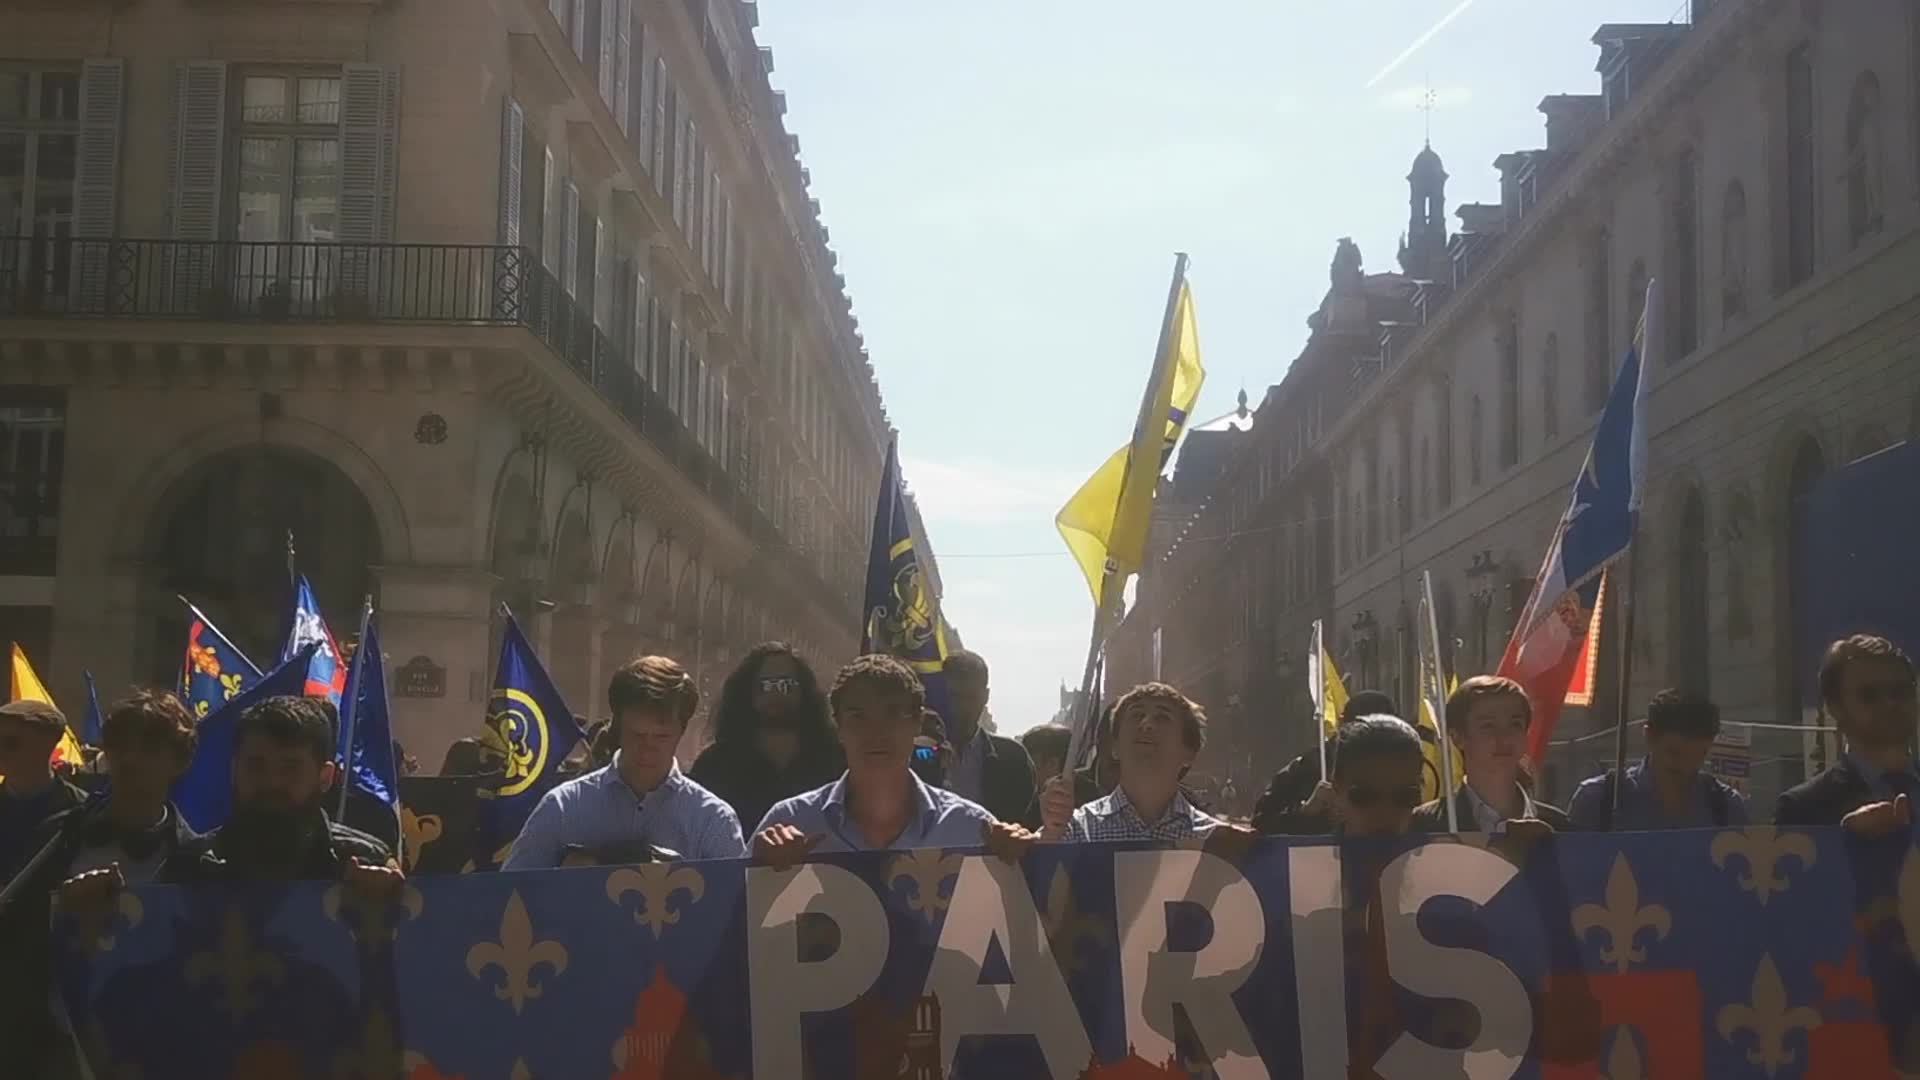 The far-right French monarchist movement Action française demonstrate in Paris